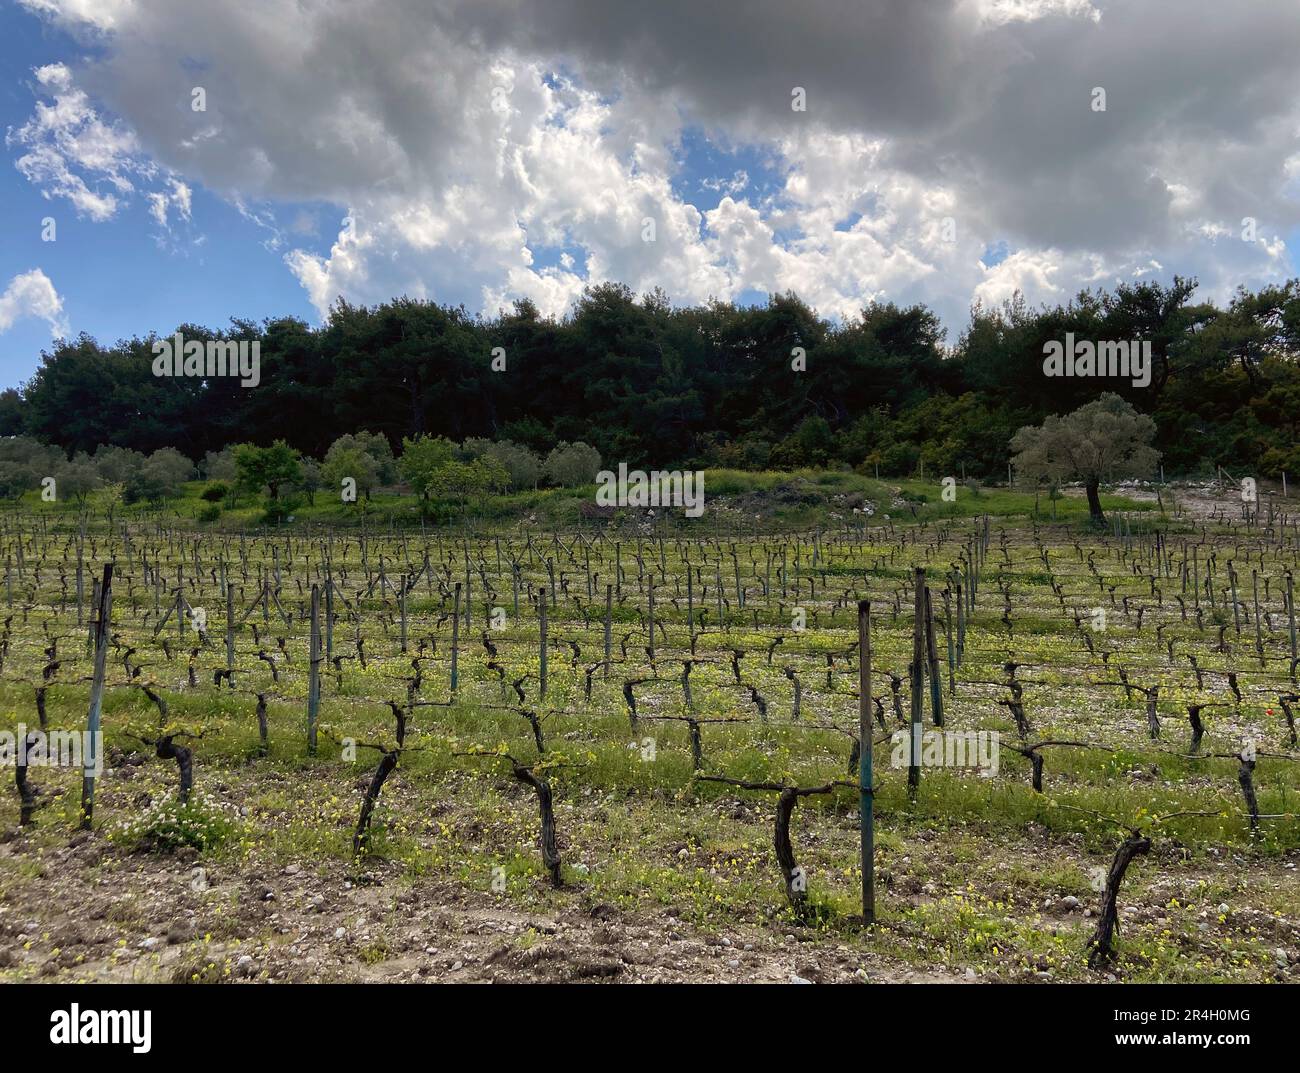 Rows of vineyards in the western Turkiye, İzmir, Urla, cloudy skies, grape fields perfect winery tour private vinery surrounded by green tree forests Stock Photo